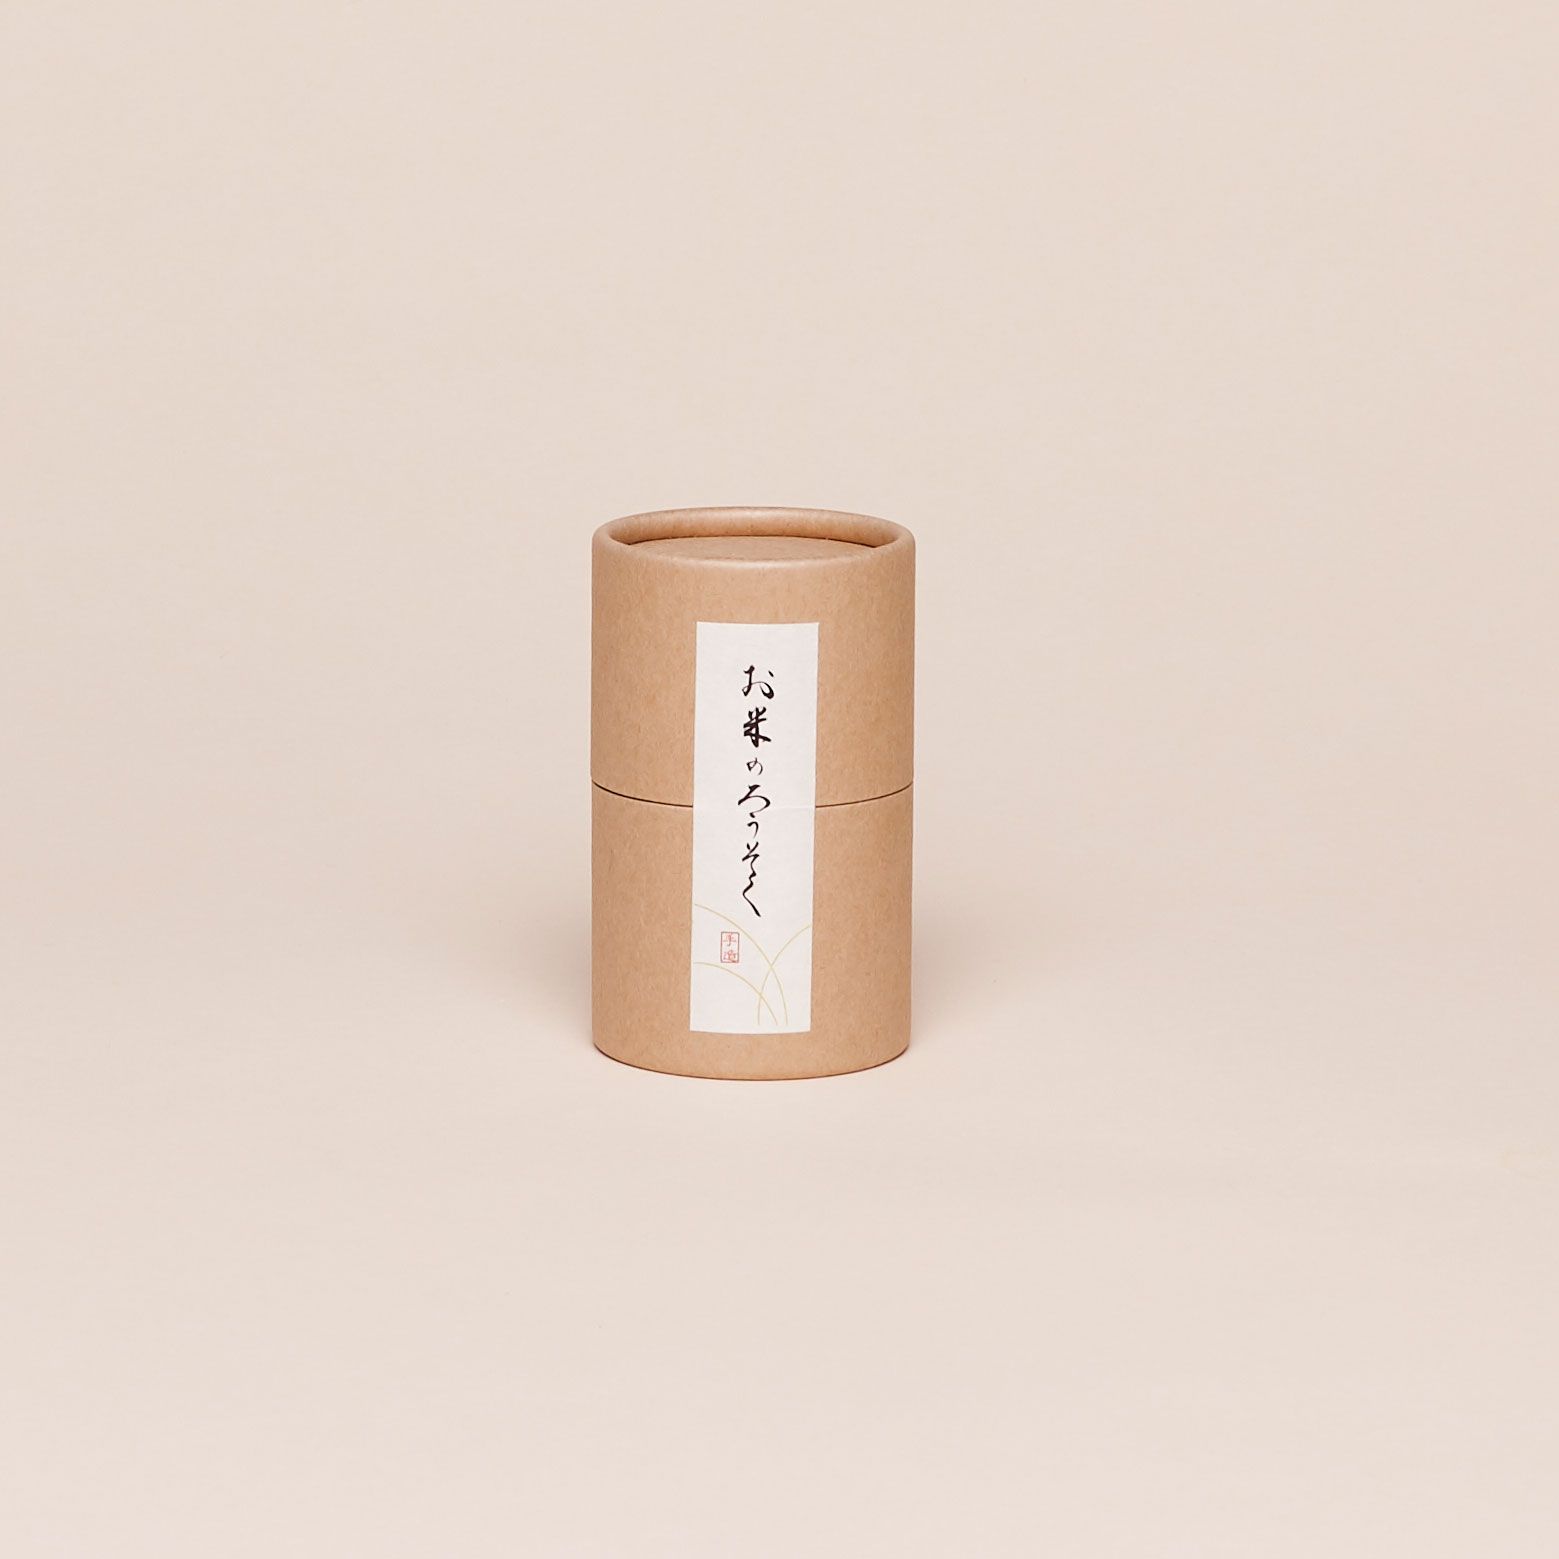 Brown paper cylinder with a vertical white label that has Japanese writing on it